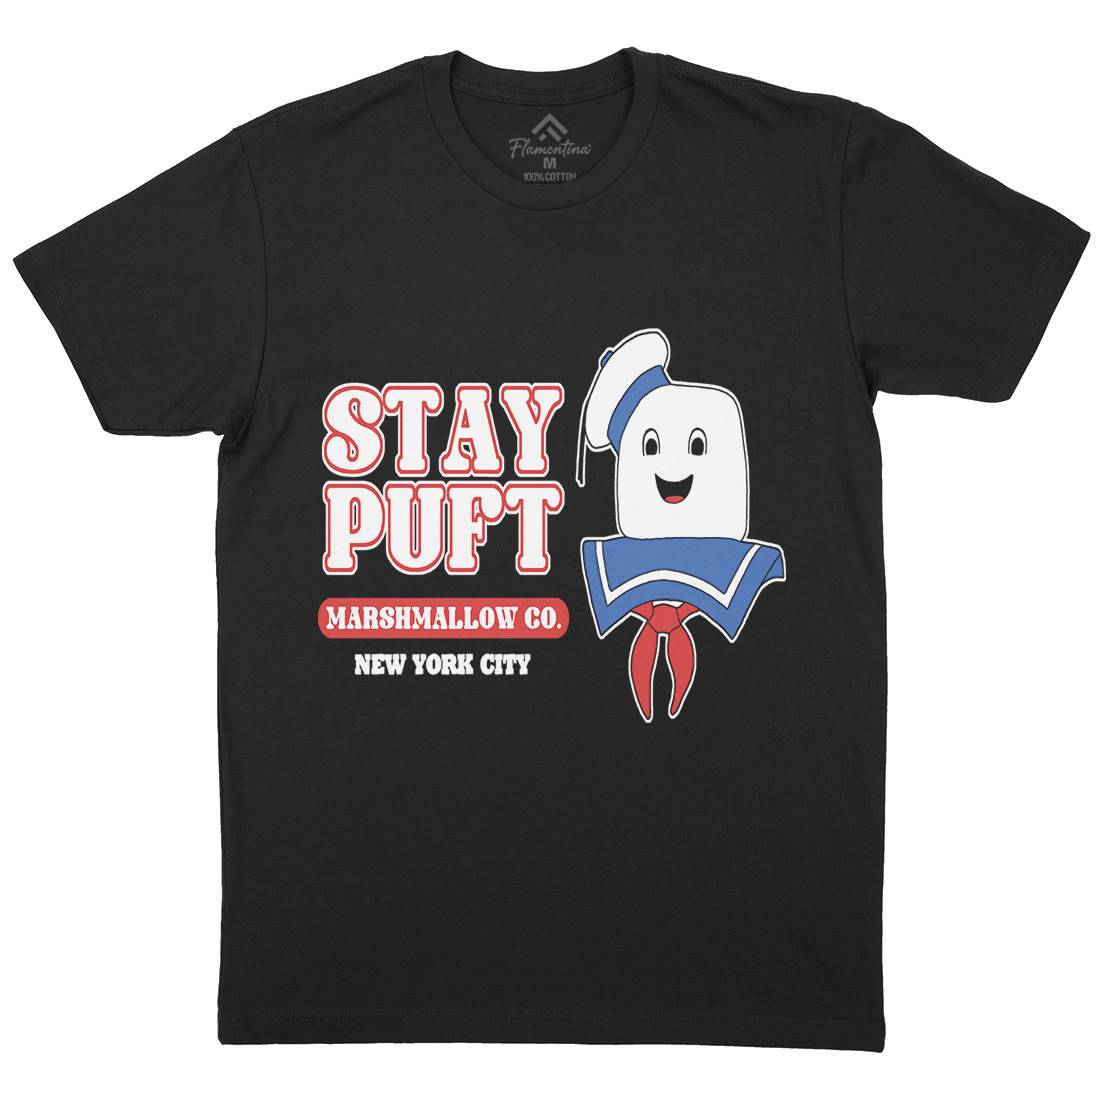 Stay Puft Co Mens Organic Crew Neck T-Shirt Space D141